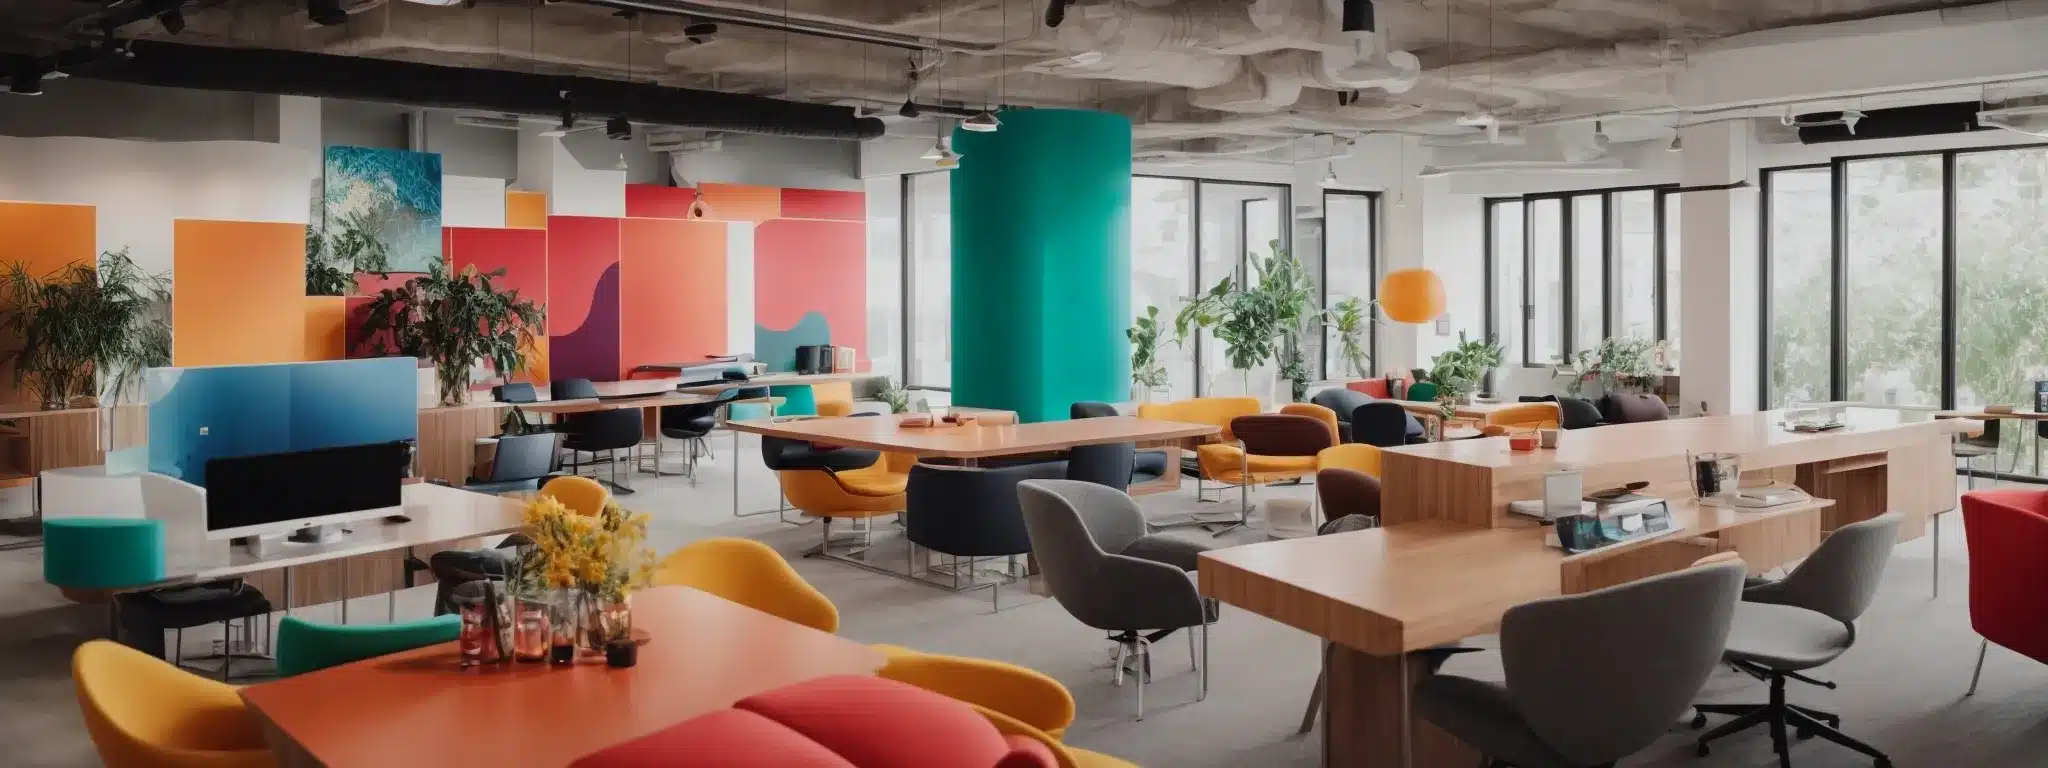 A Vibrant Meeting Room Where Employees, Surrounded By Vivid Brand Colors And Creative Spaces, Collaborate In A Culture-Rich Environment.